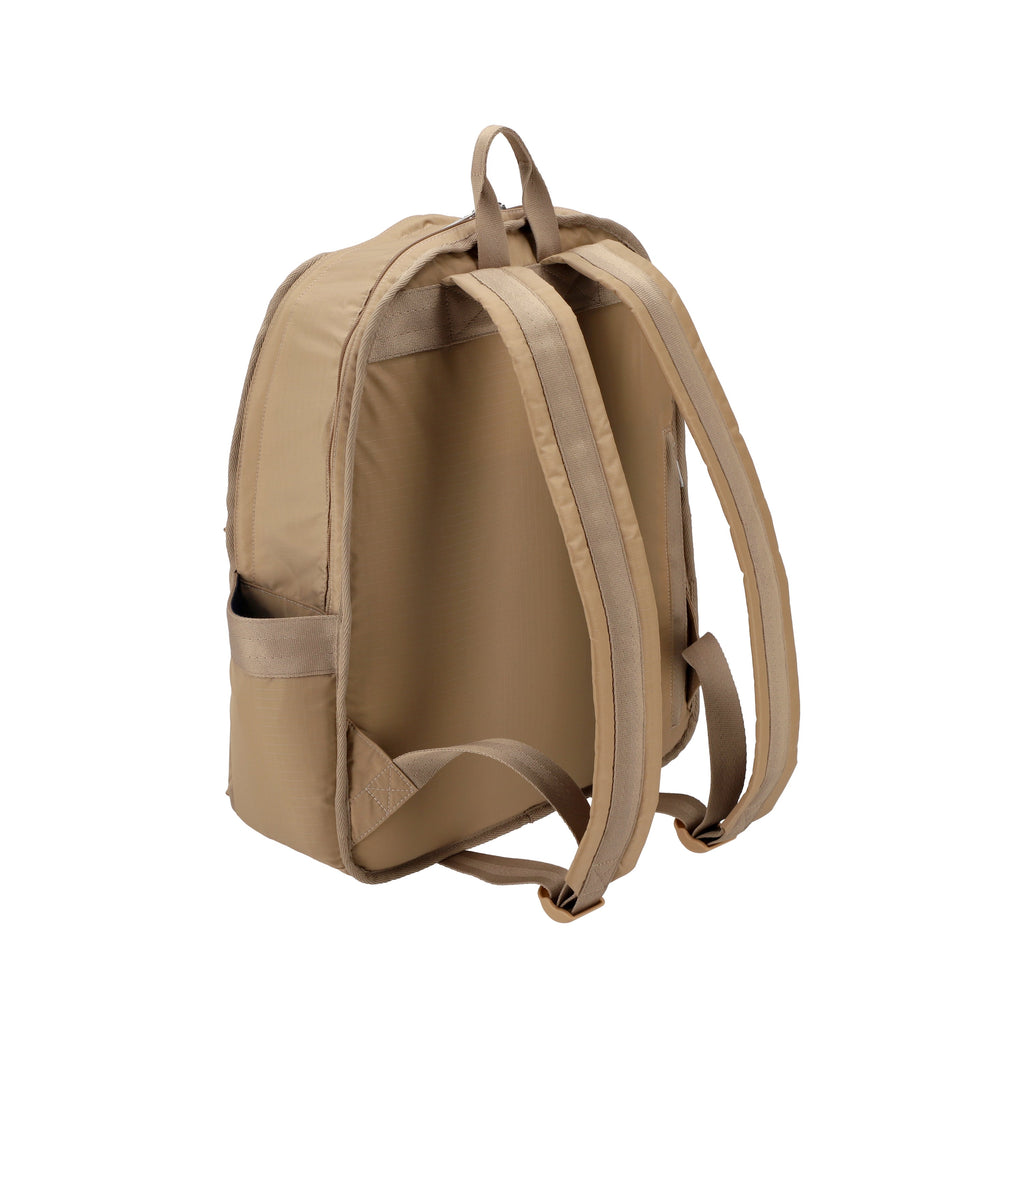 Fitness backpack in beige for sports and backpacking – Gym Generation®